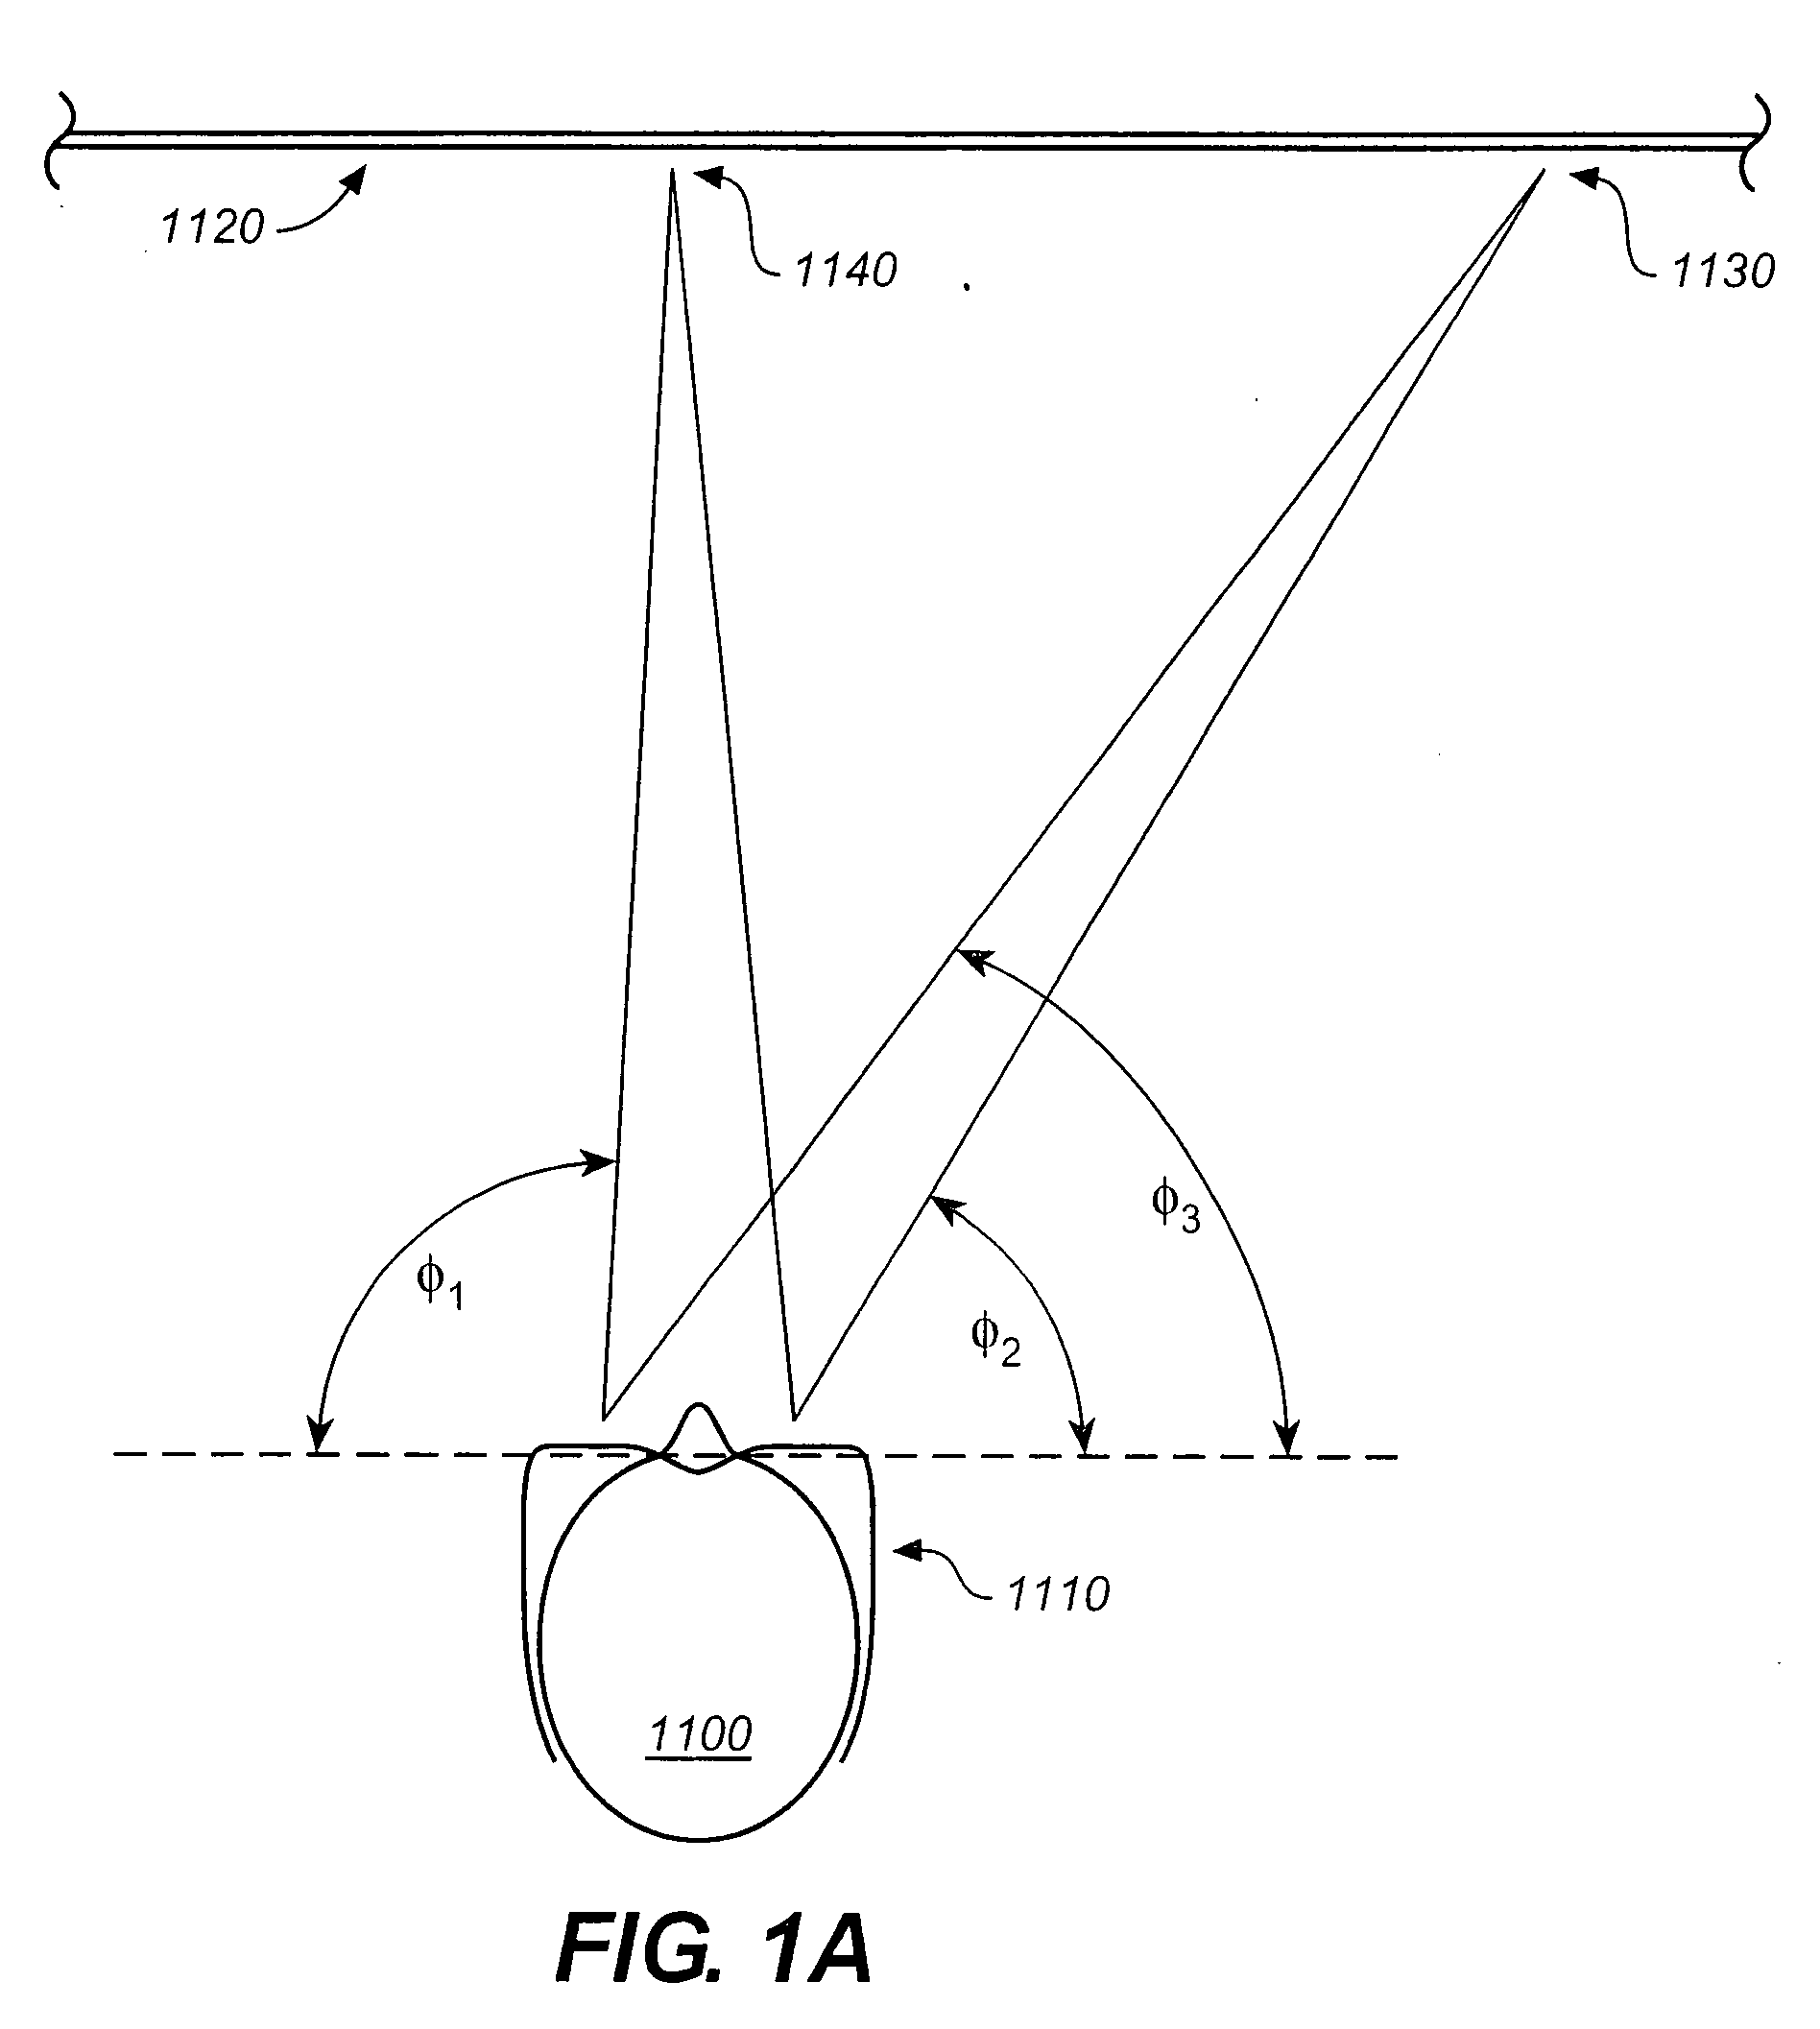 Method and system for shaped glasses and viewing 3d images